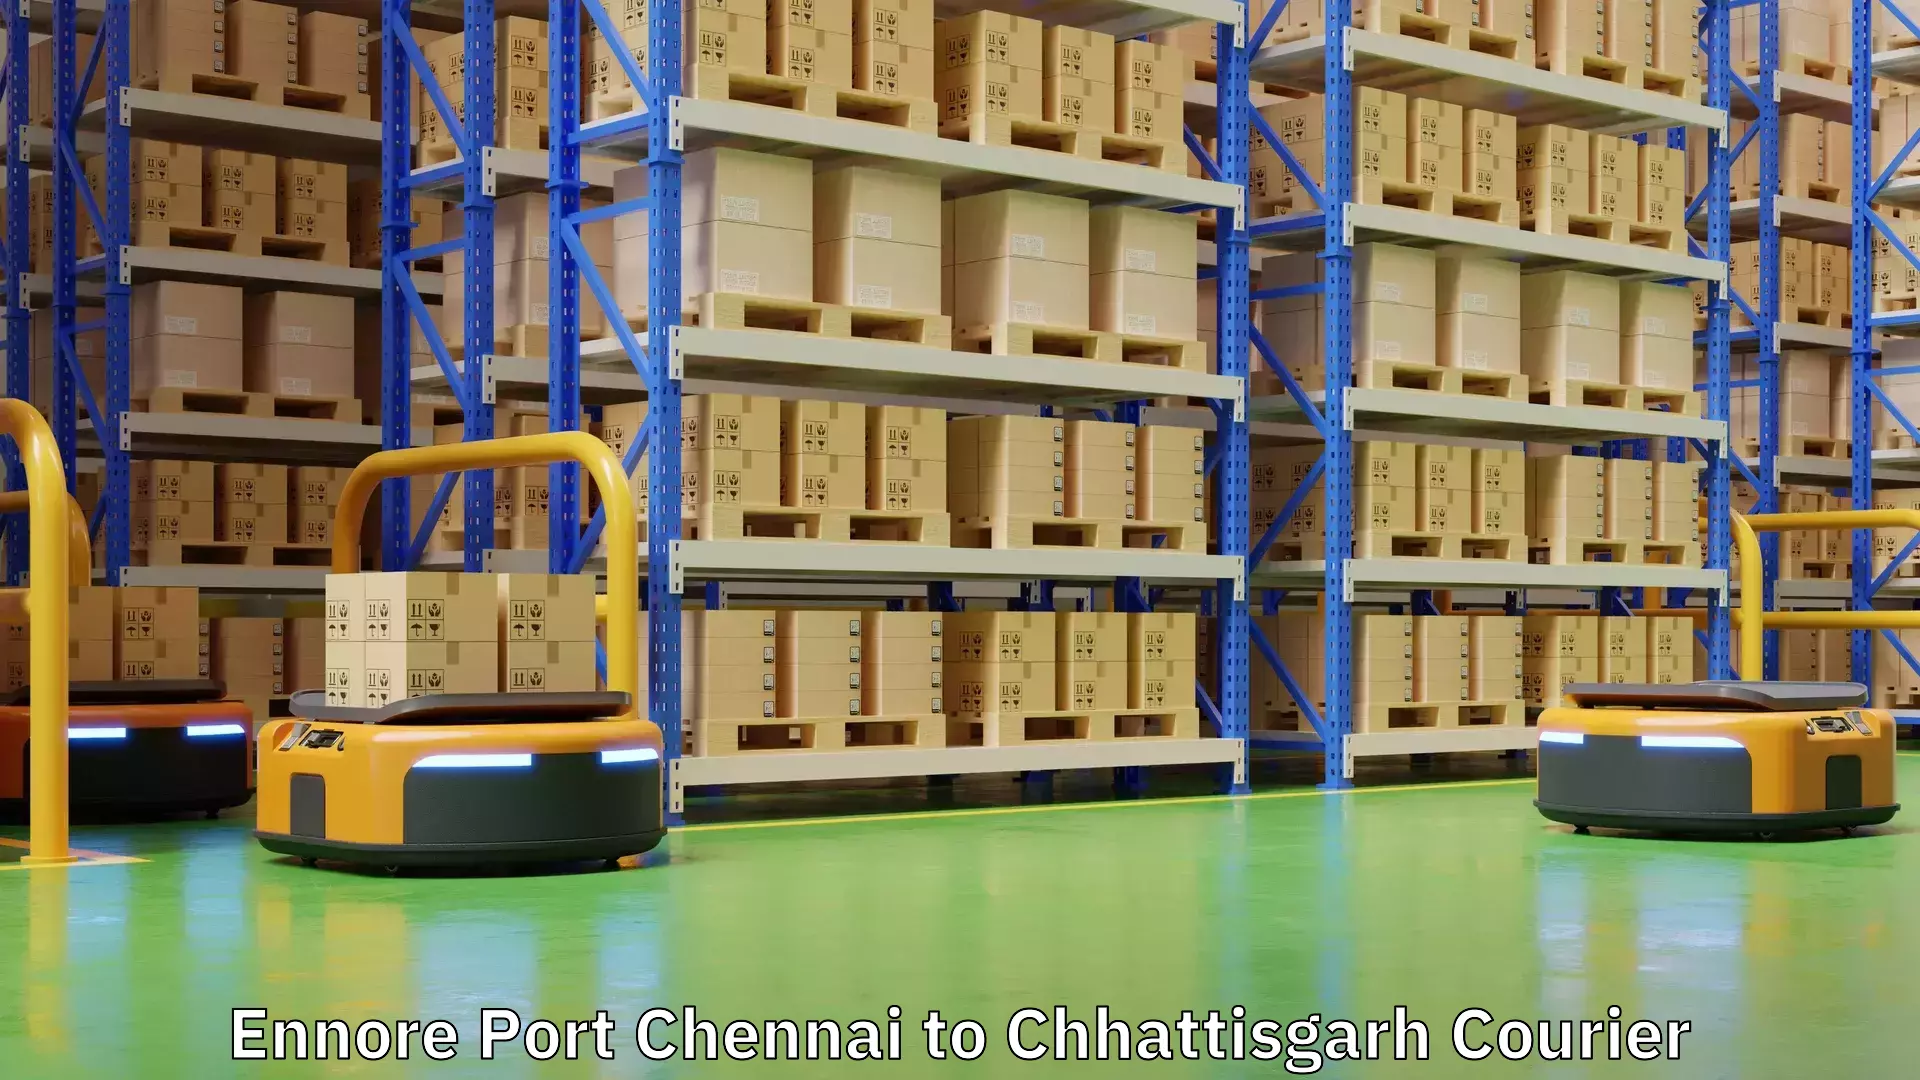 Large package courier Ennore Port Chennai to Chhattisgarh